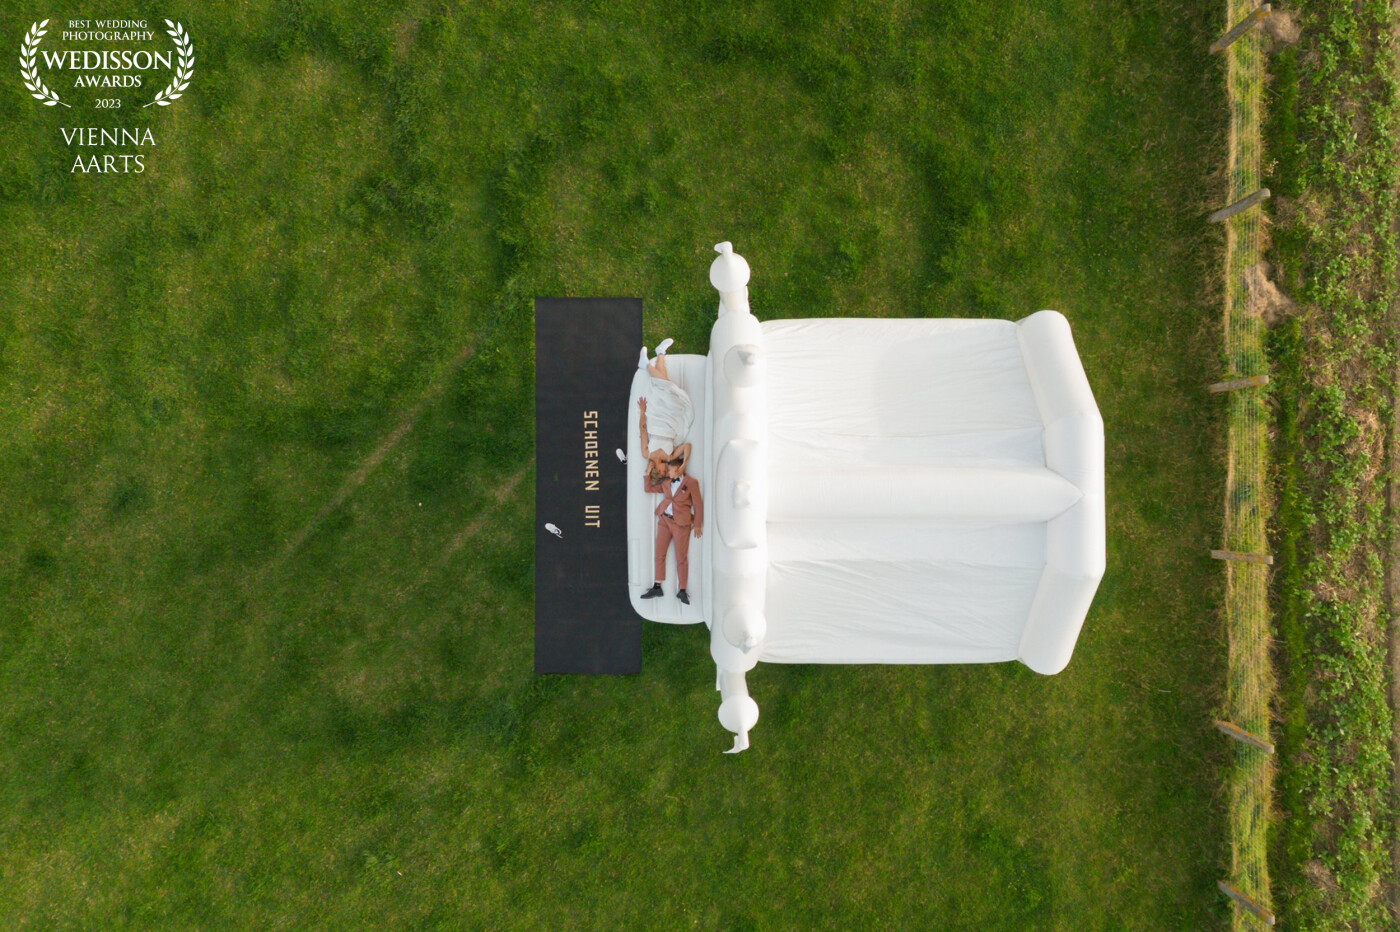 On a very pretty day in august Tineke en Démi said yes to each other. This lovely couple had a great bouncy castle and of course I needed to make some great pictures of them jumping together and also this photo. To get this great photo I used my drone.